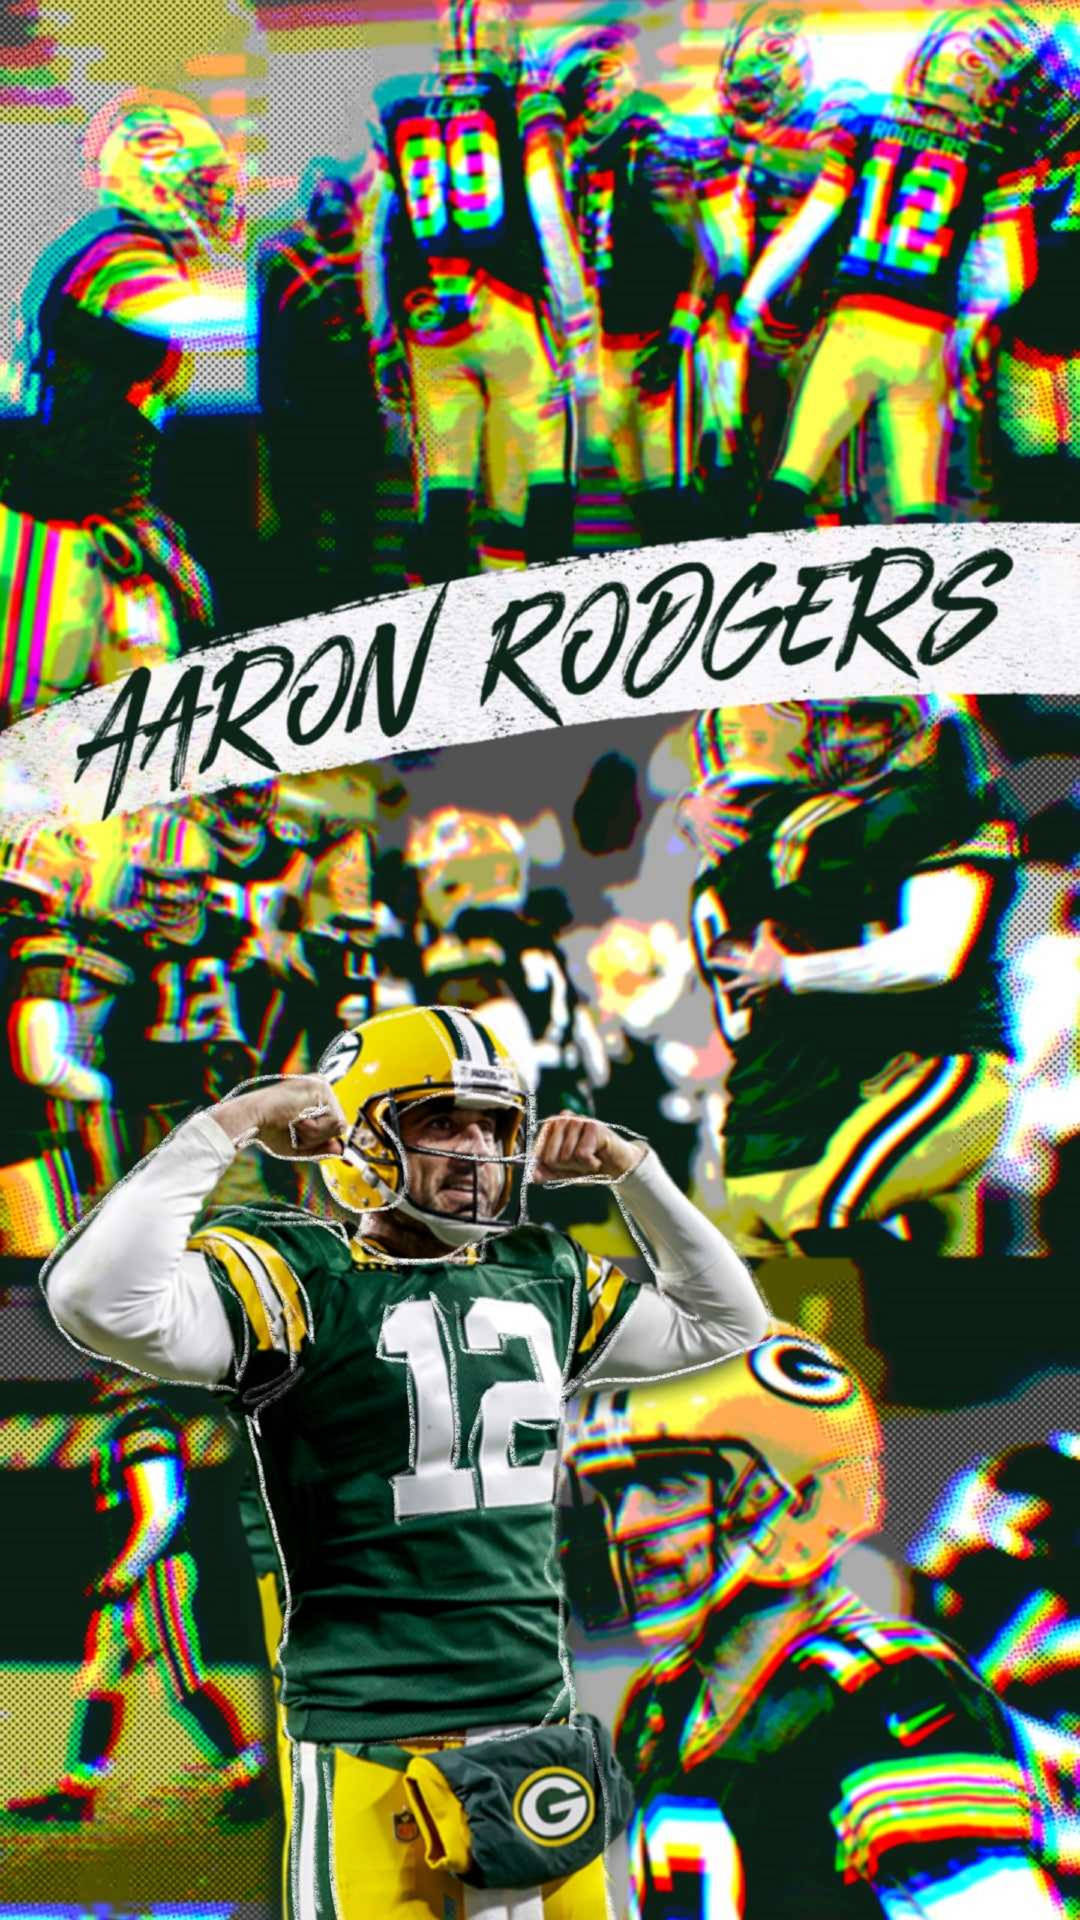 Aaron Rodgers Blurry Aesthetic Background